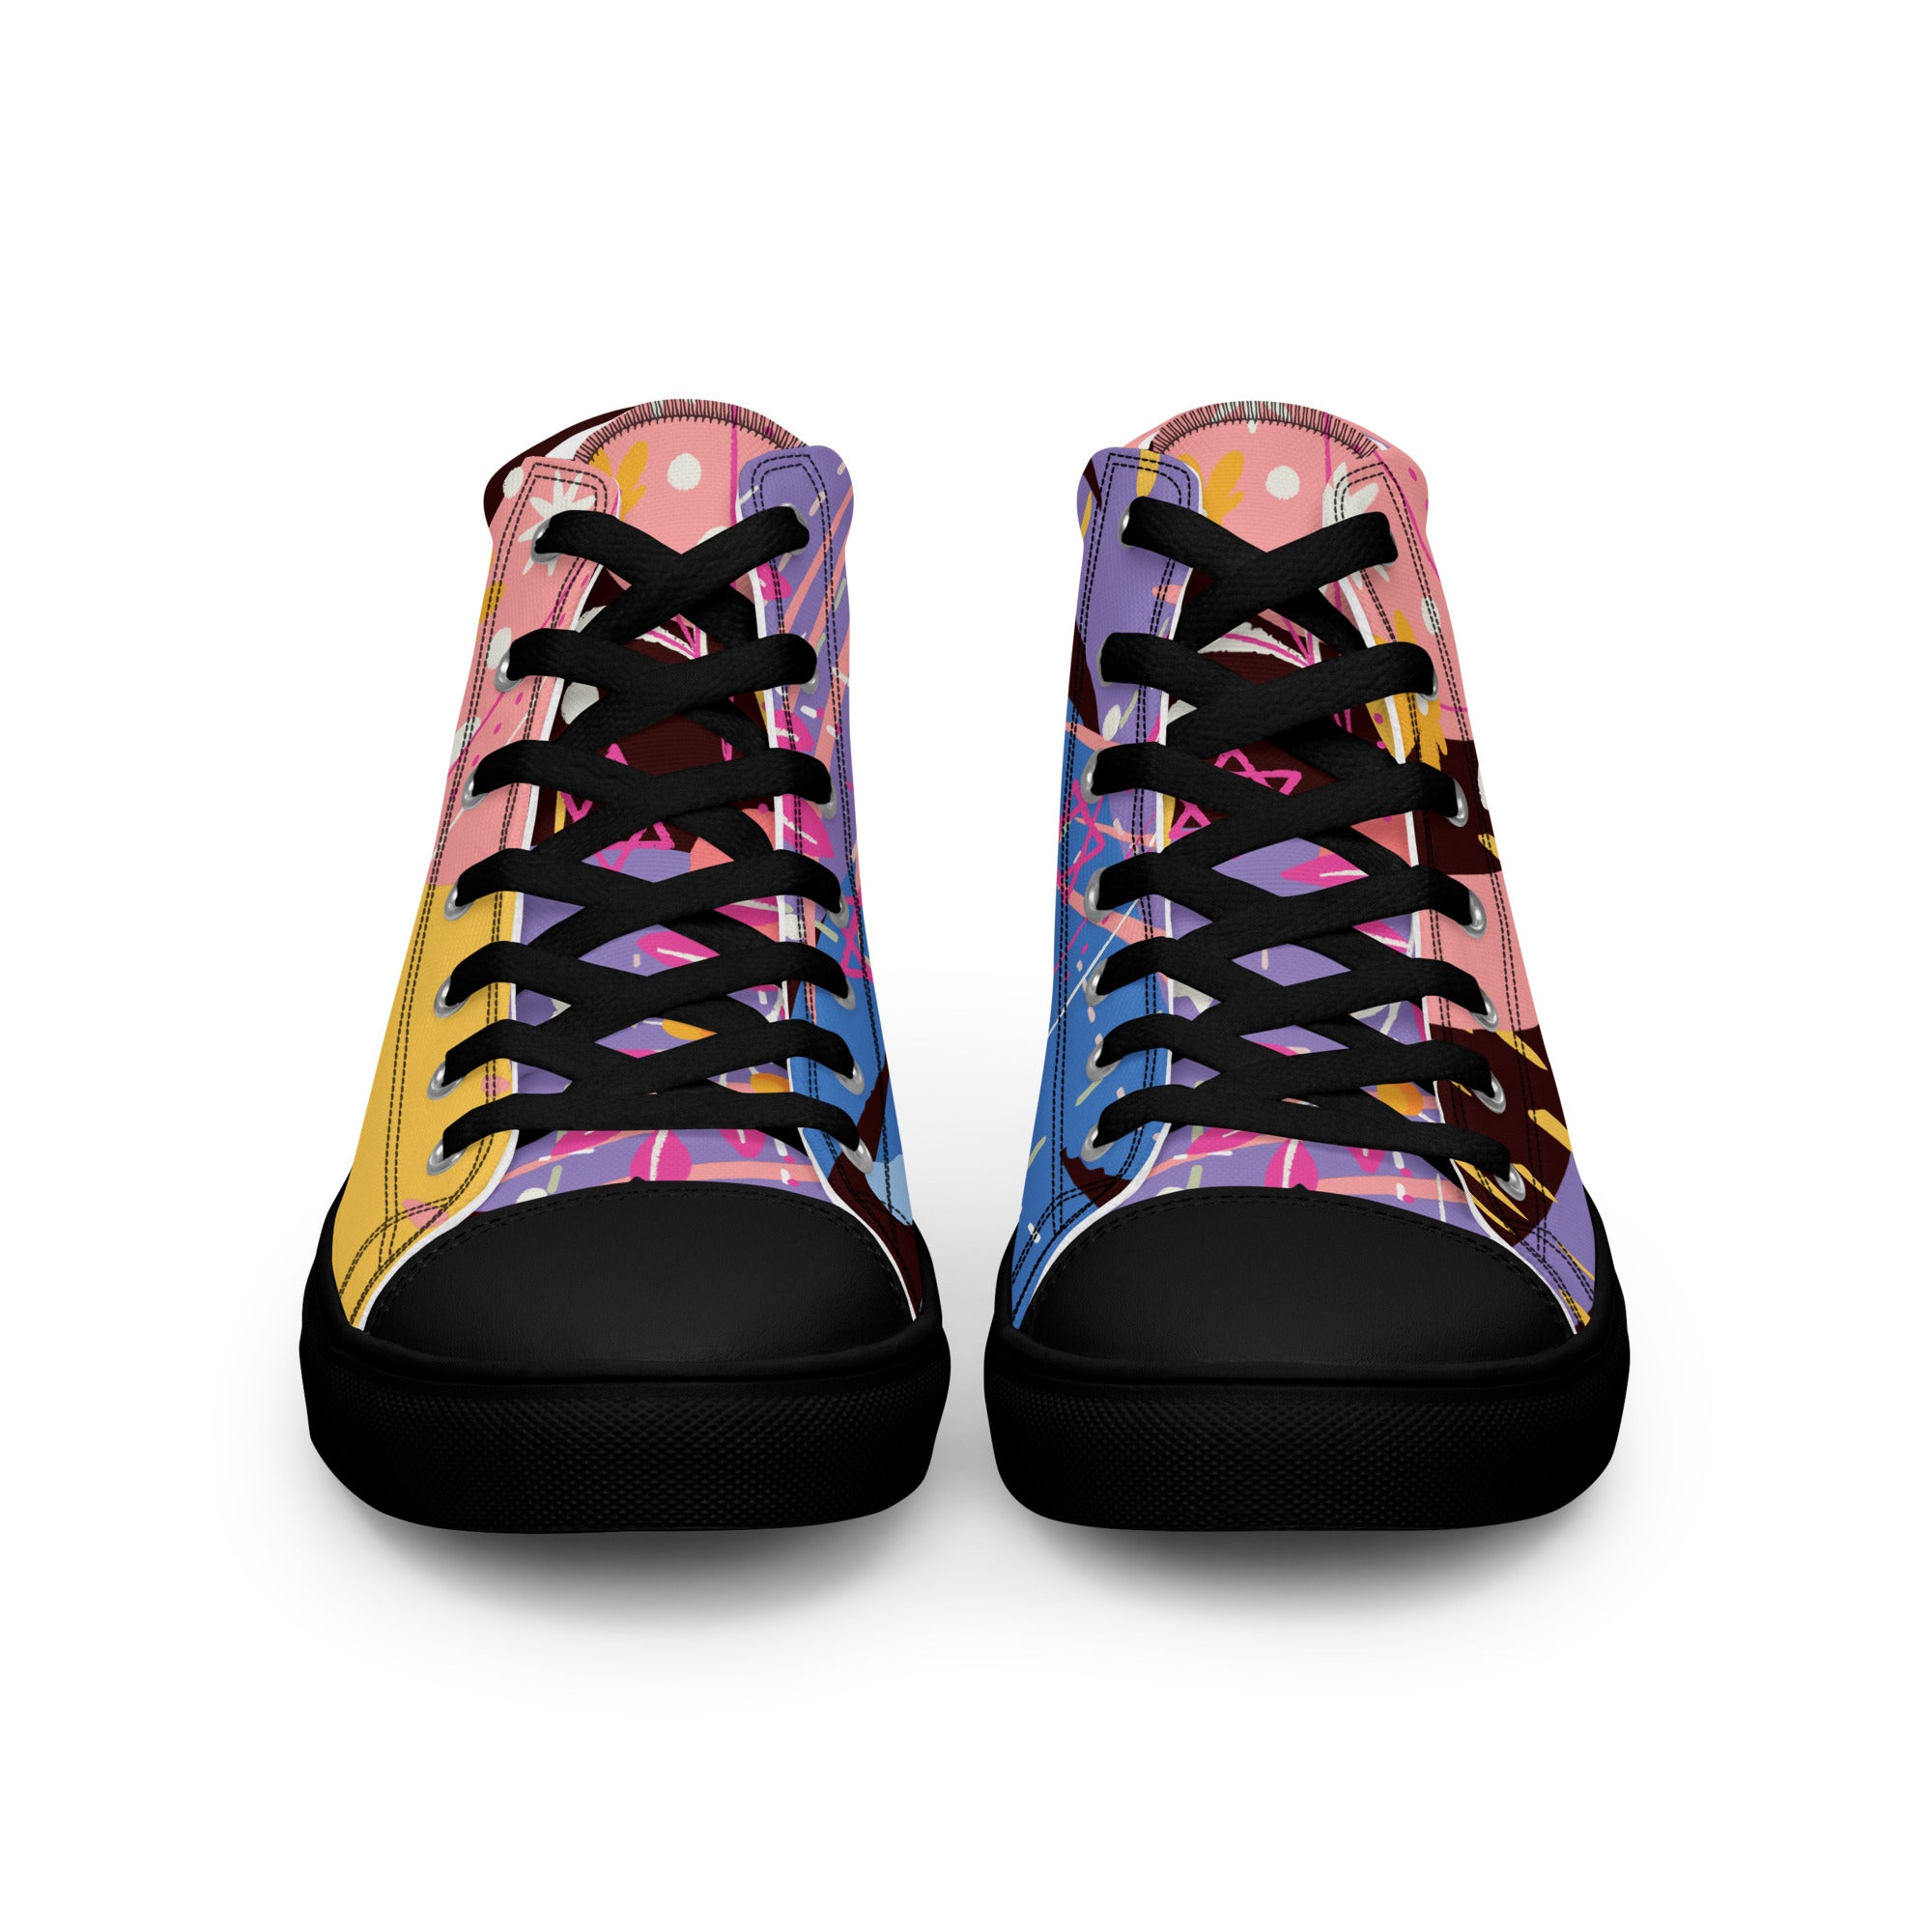 Limited edition women’s high top canvas sneaker shoes custom designer with psychedelic pattern print, perfect gift for girlfriend